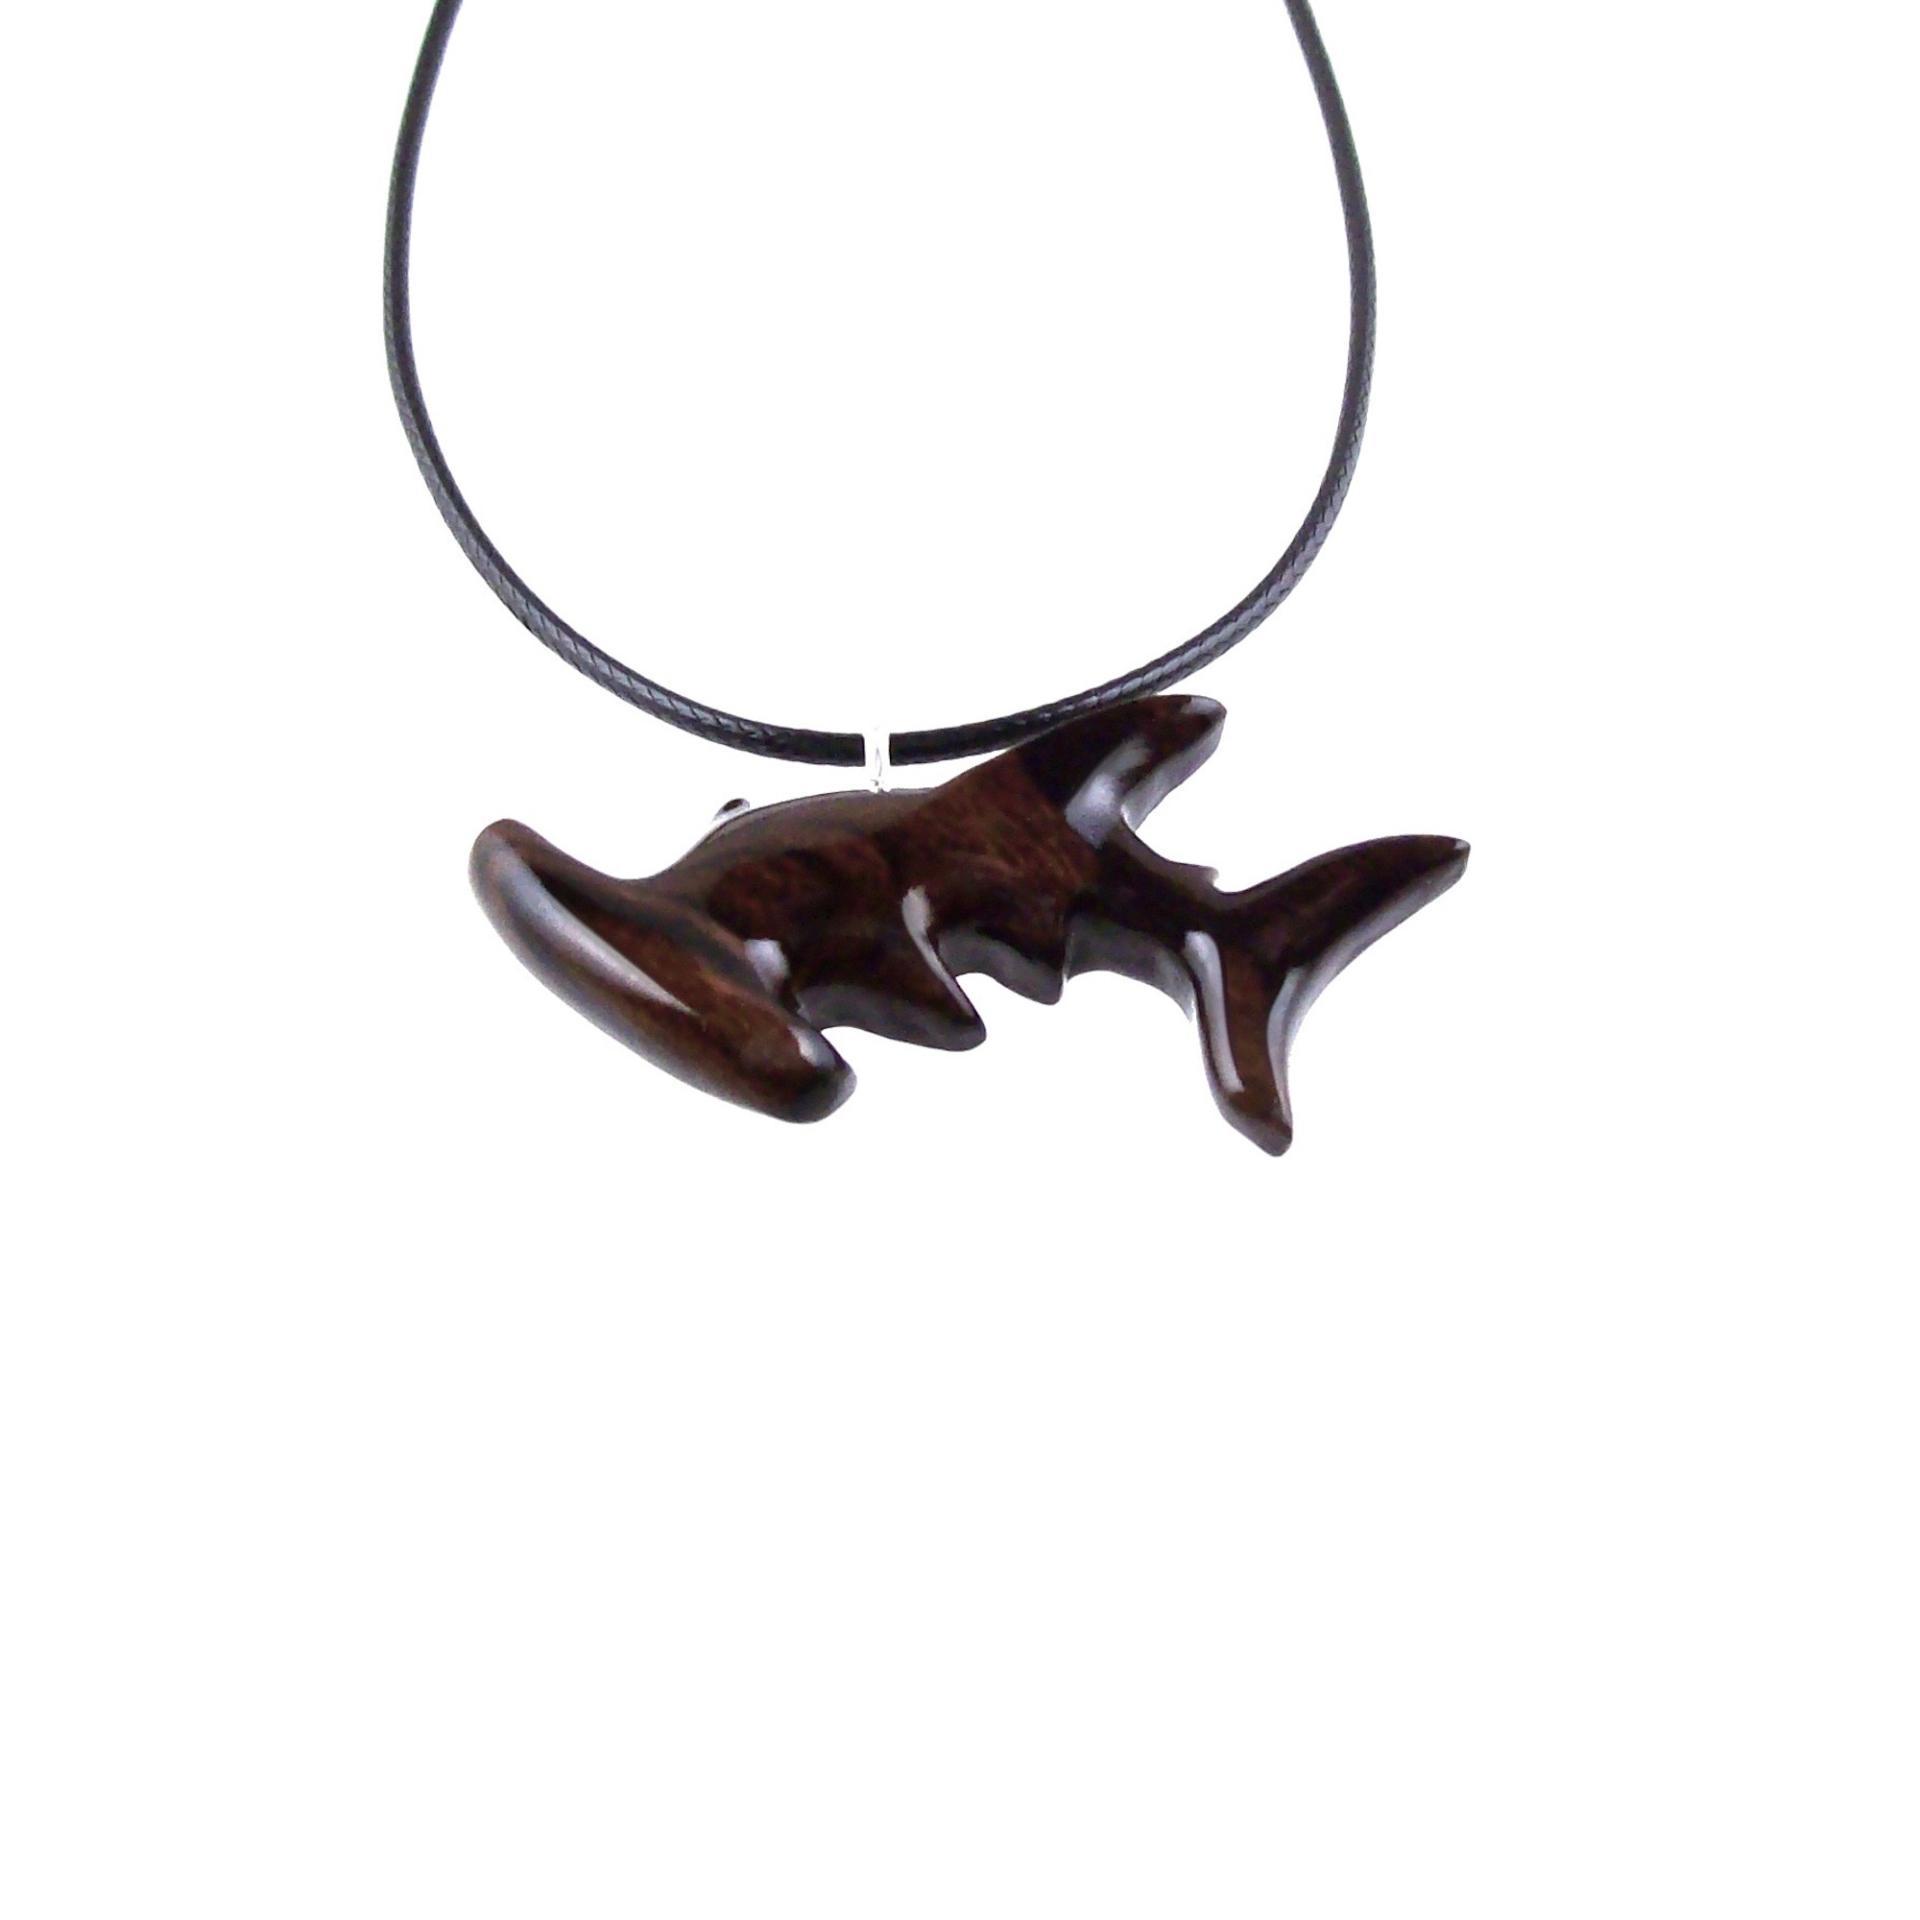 Hammerhead Shark Necklace, Hand Carved Wooden Shark Pendant, Mens Wood Jewelry, Nautical Necklace, Gift for Him